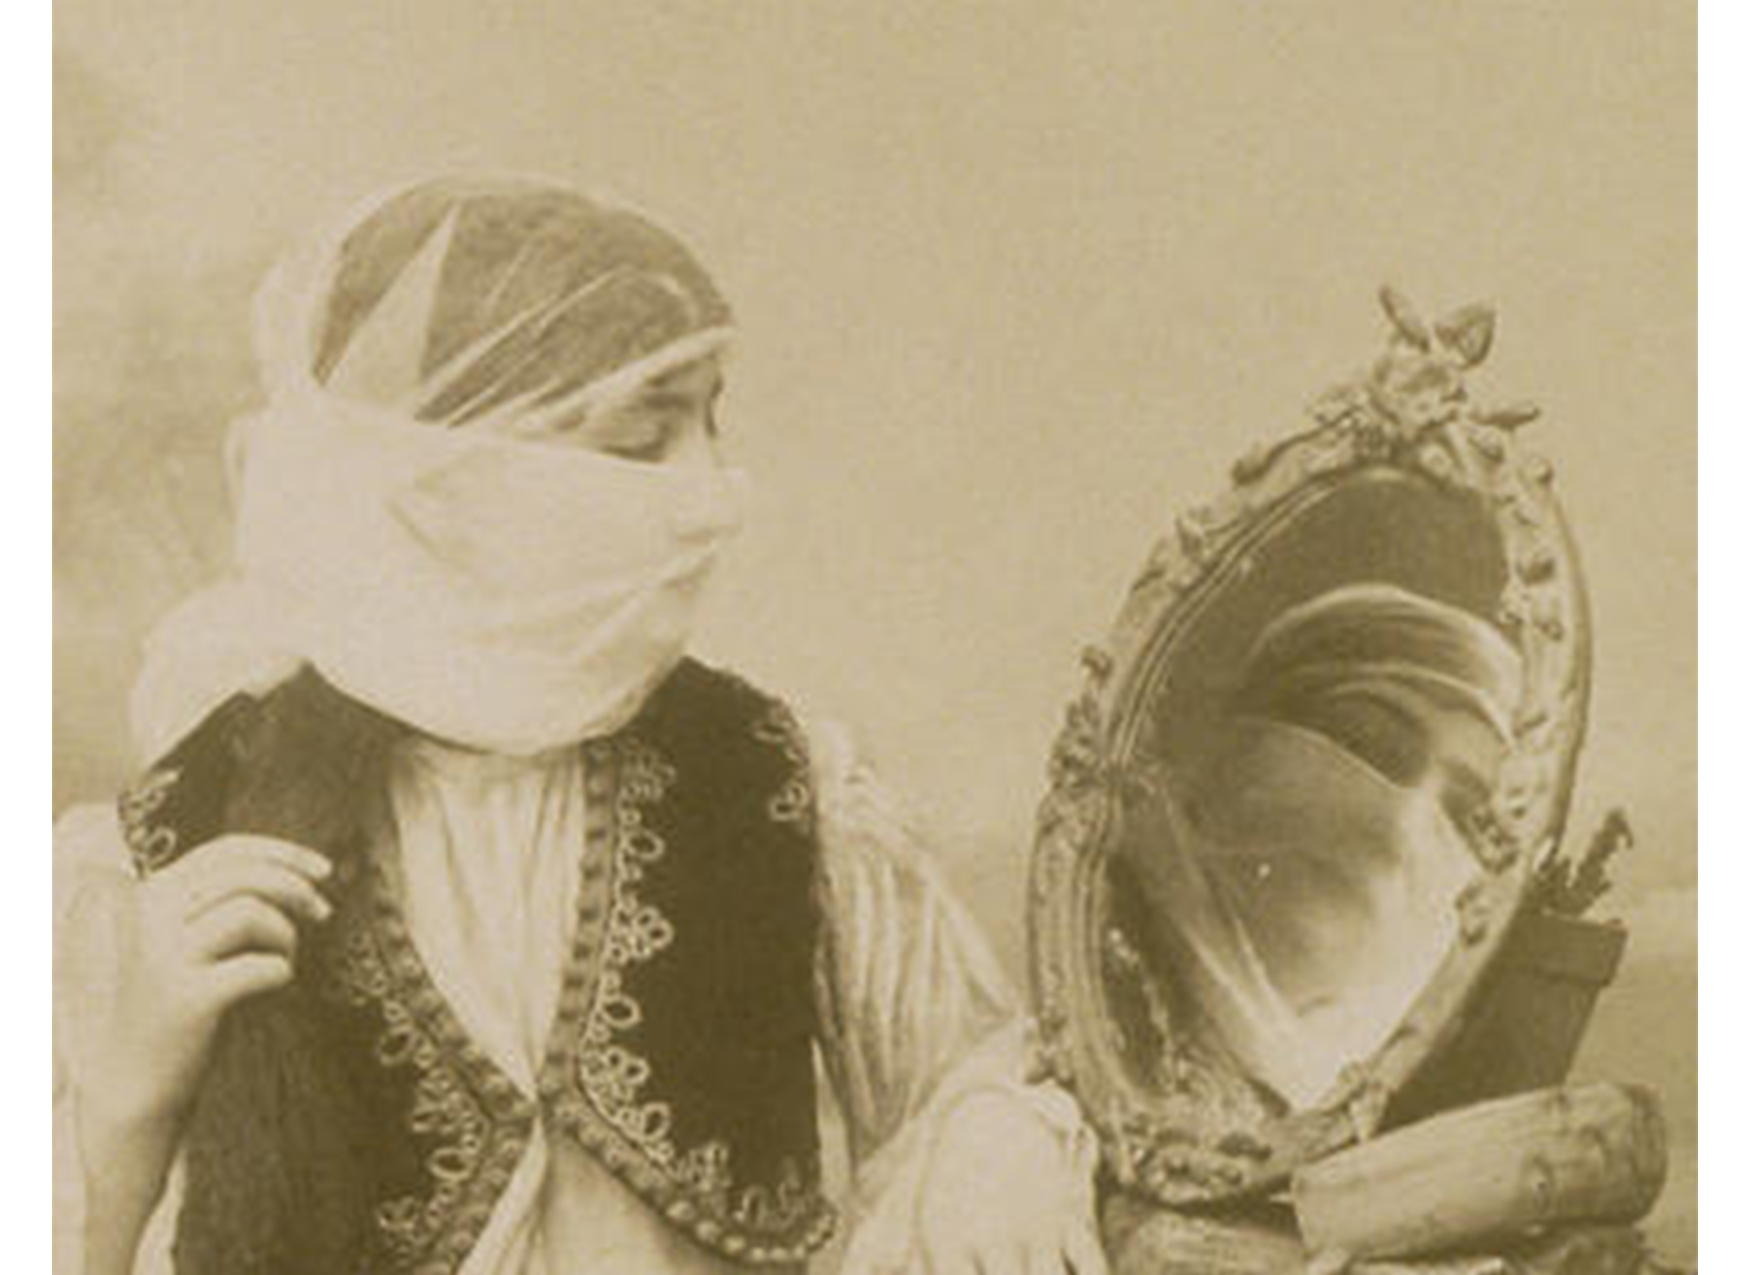 close-up of woman with veil looking into a mirror